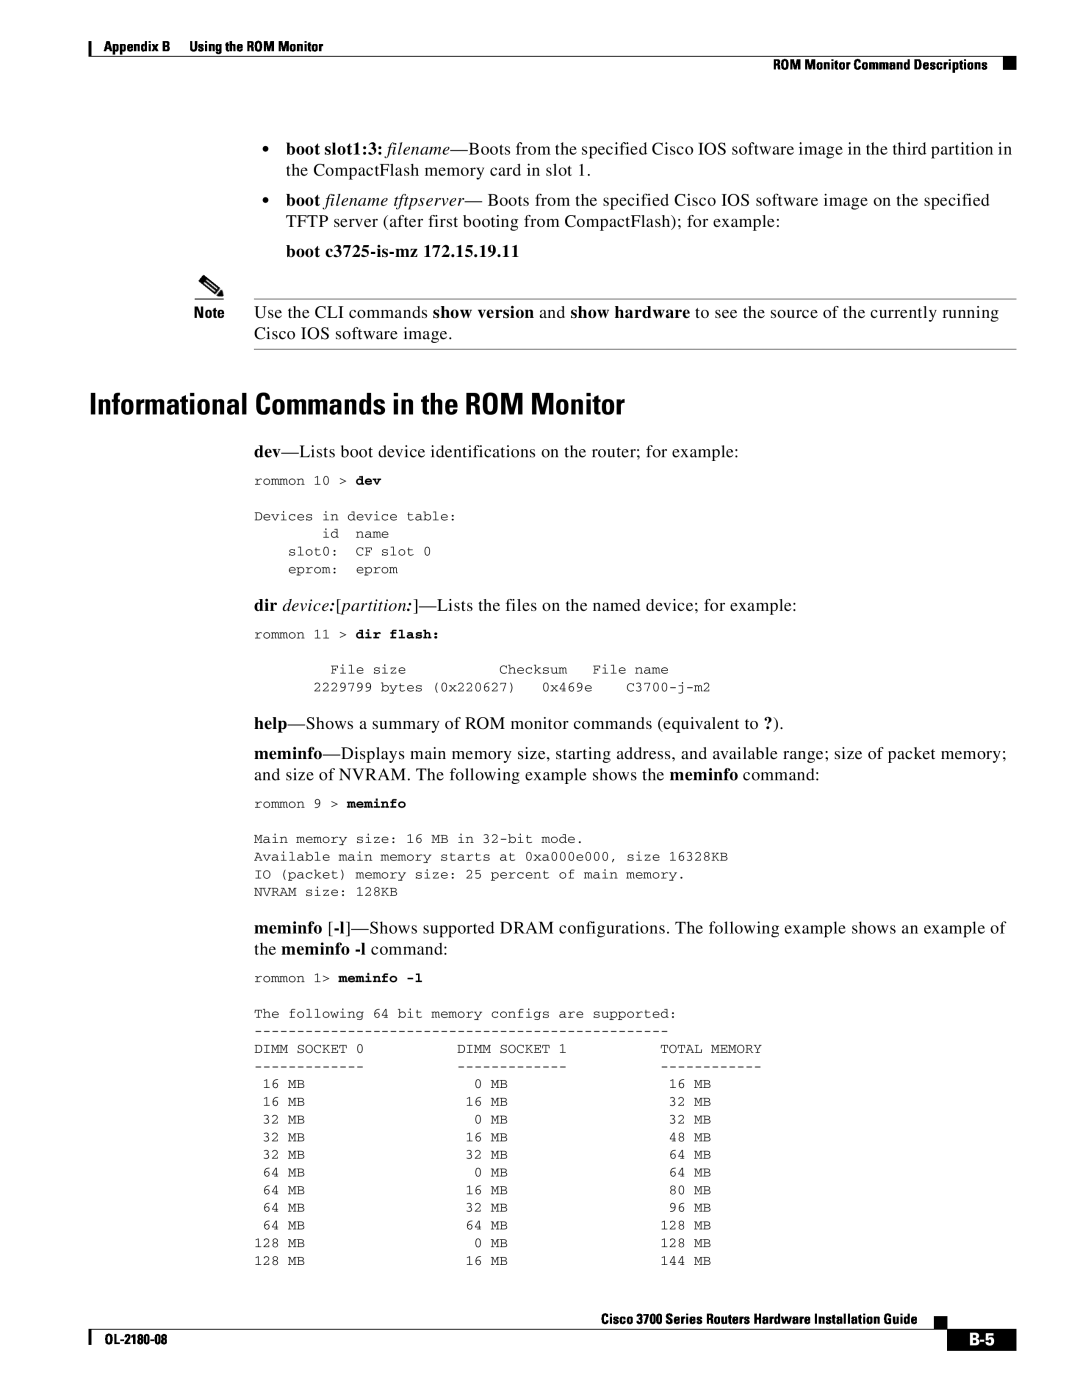 Cisco Systems 3700 Series manual Informational Commands in the ROM Monitor, boot c3725-is-mz 